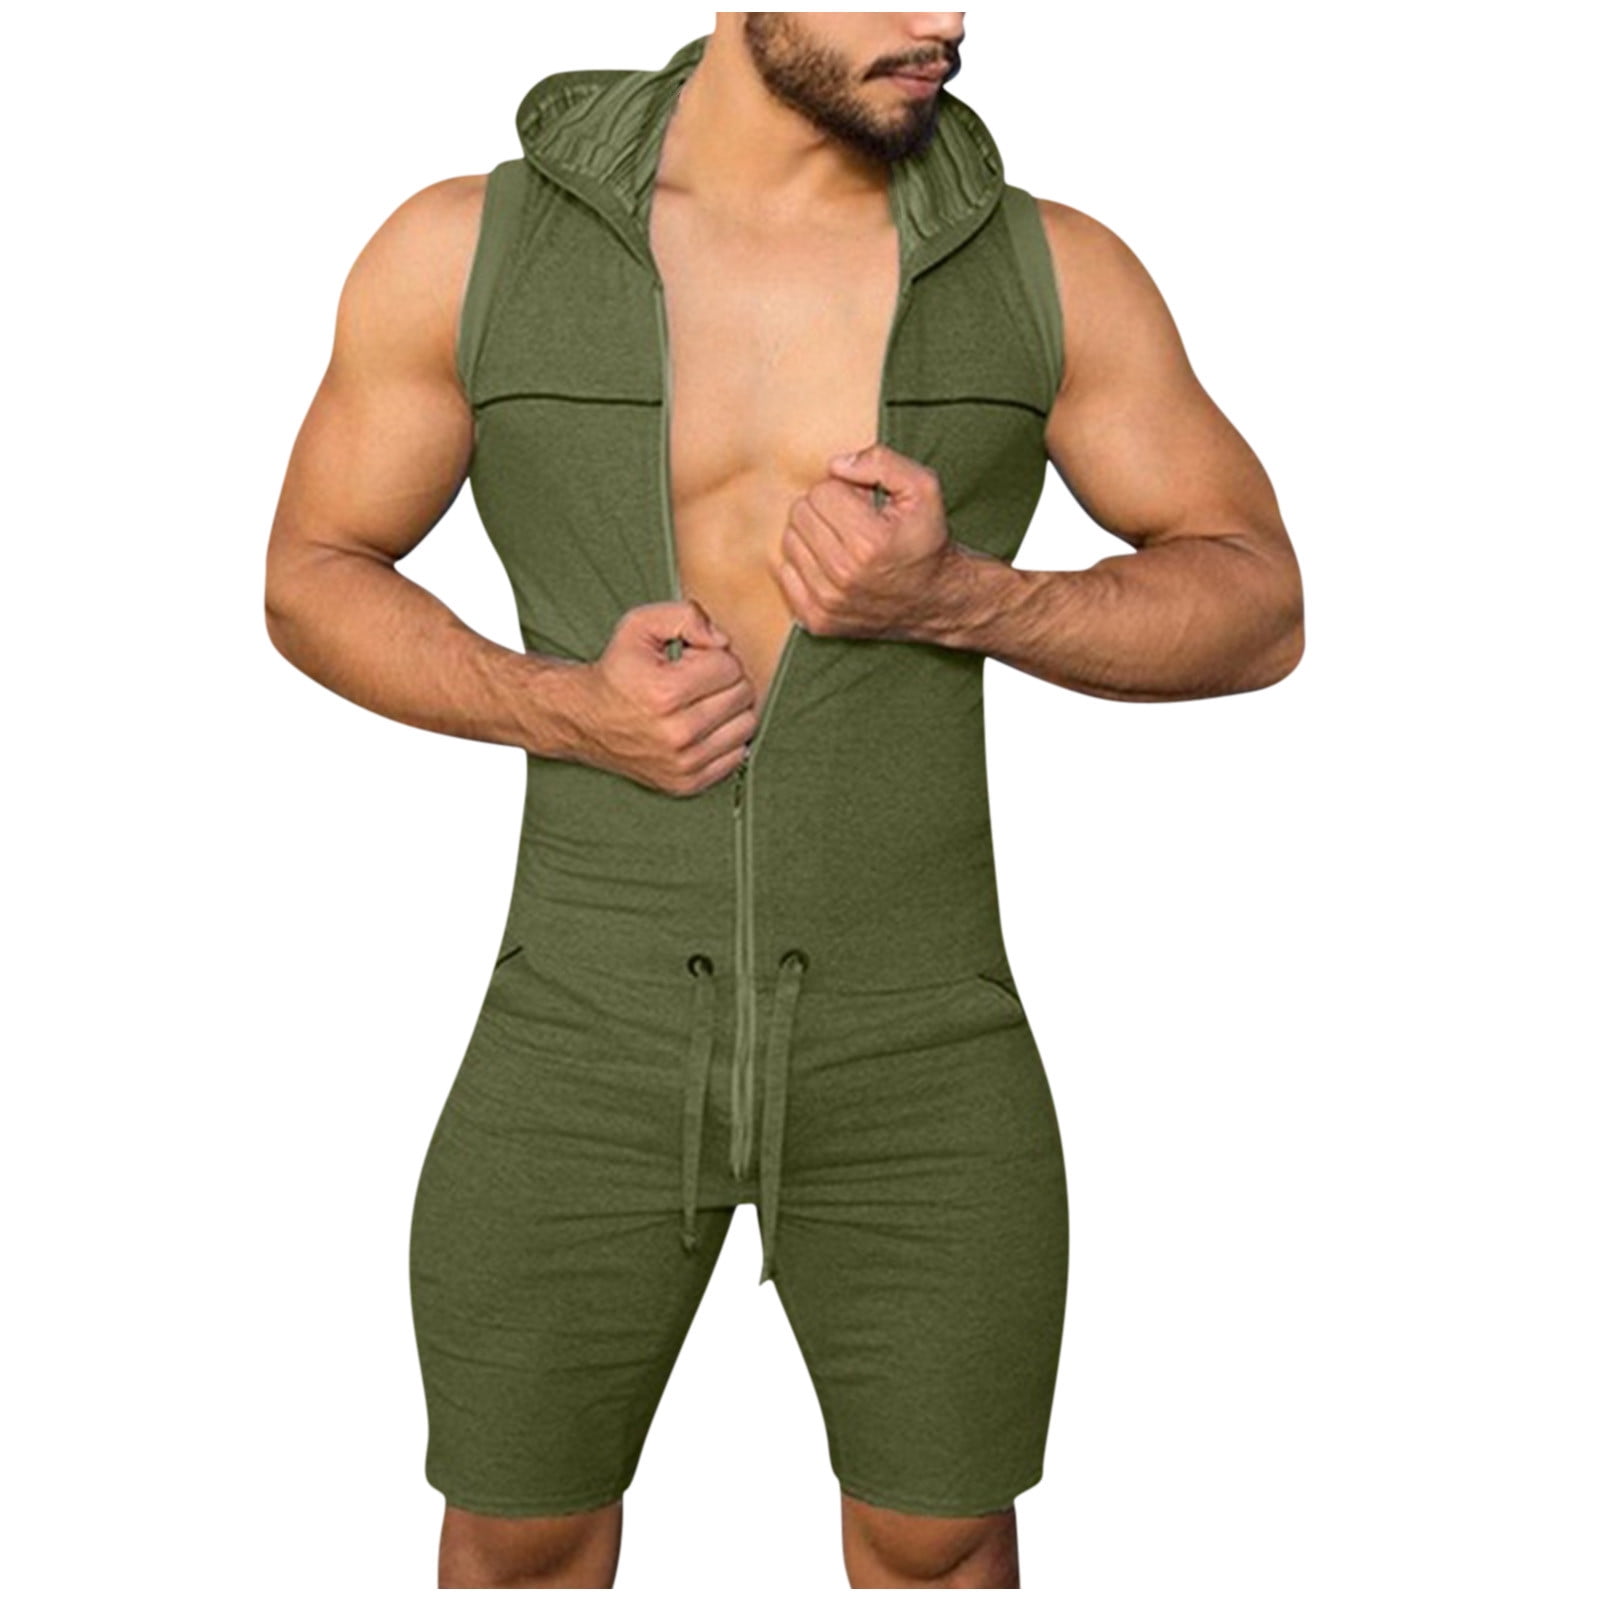 AXYRXWR Men's Summer Romper Zipper Playsuit One-Piece Short Sleeve Jumpsuit  with Pockets Male Bodysuit Outfits Plus Size (Blue, m) at Amazon Men's  Clothing store